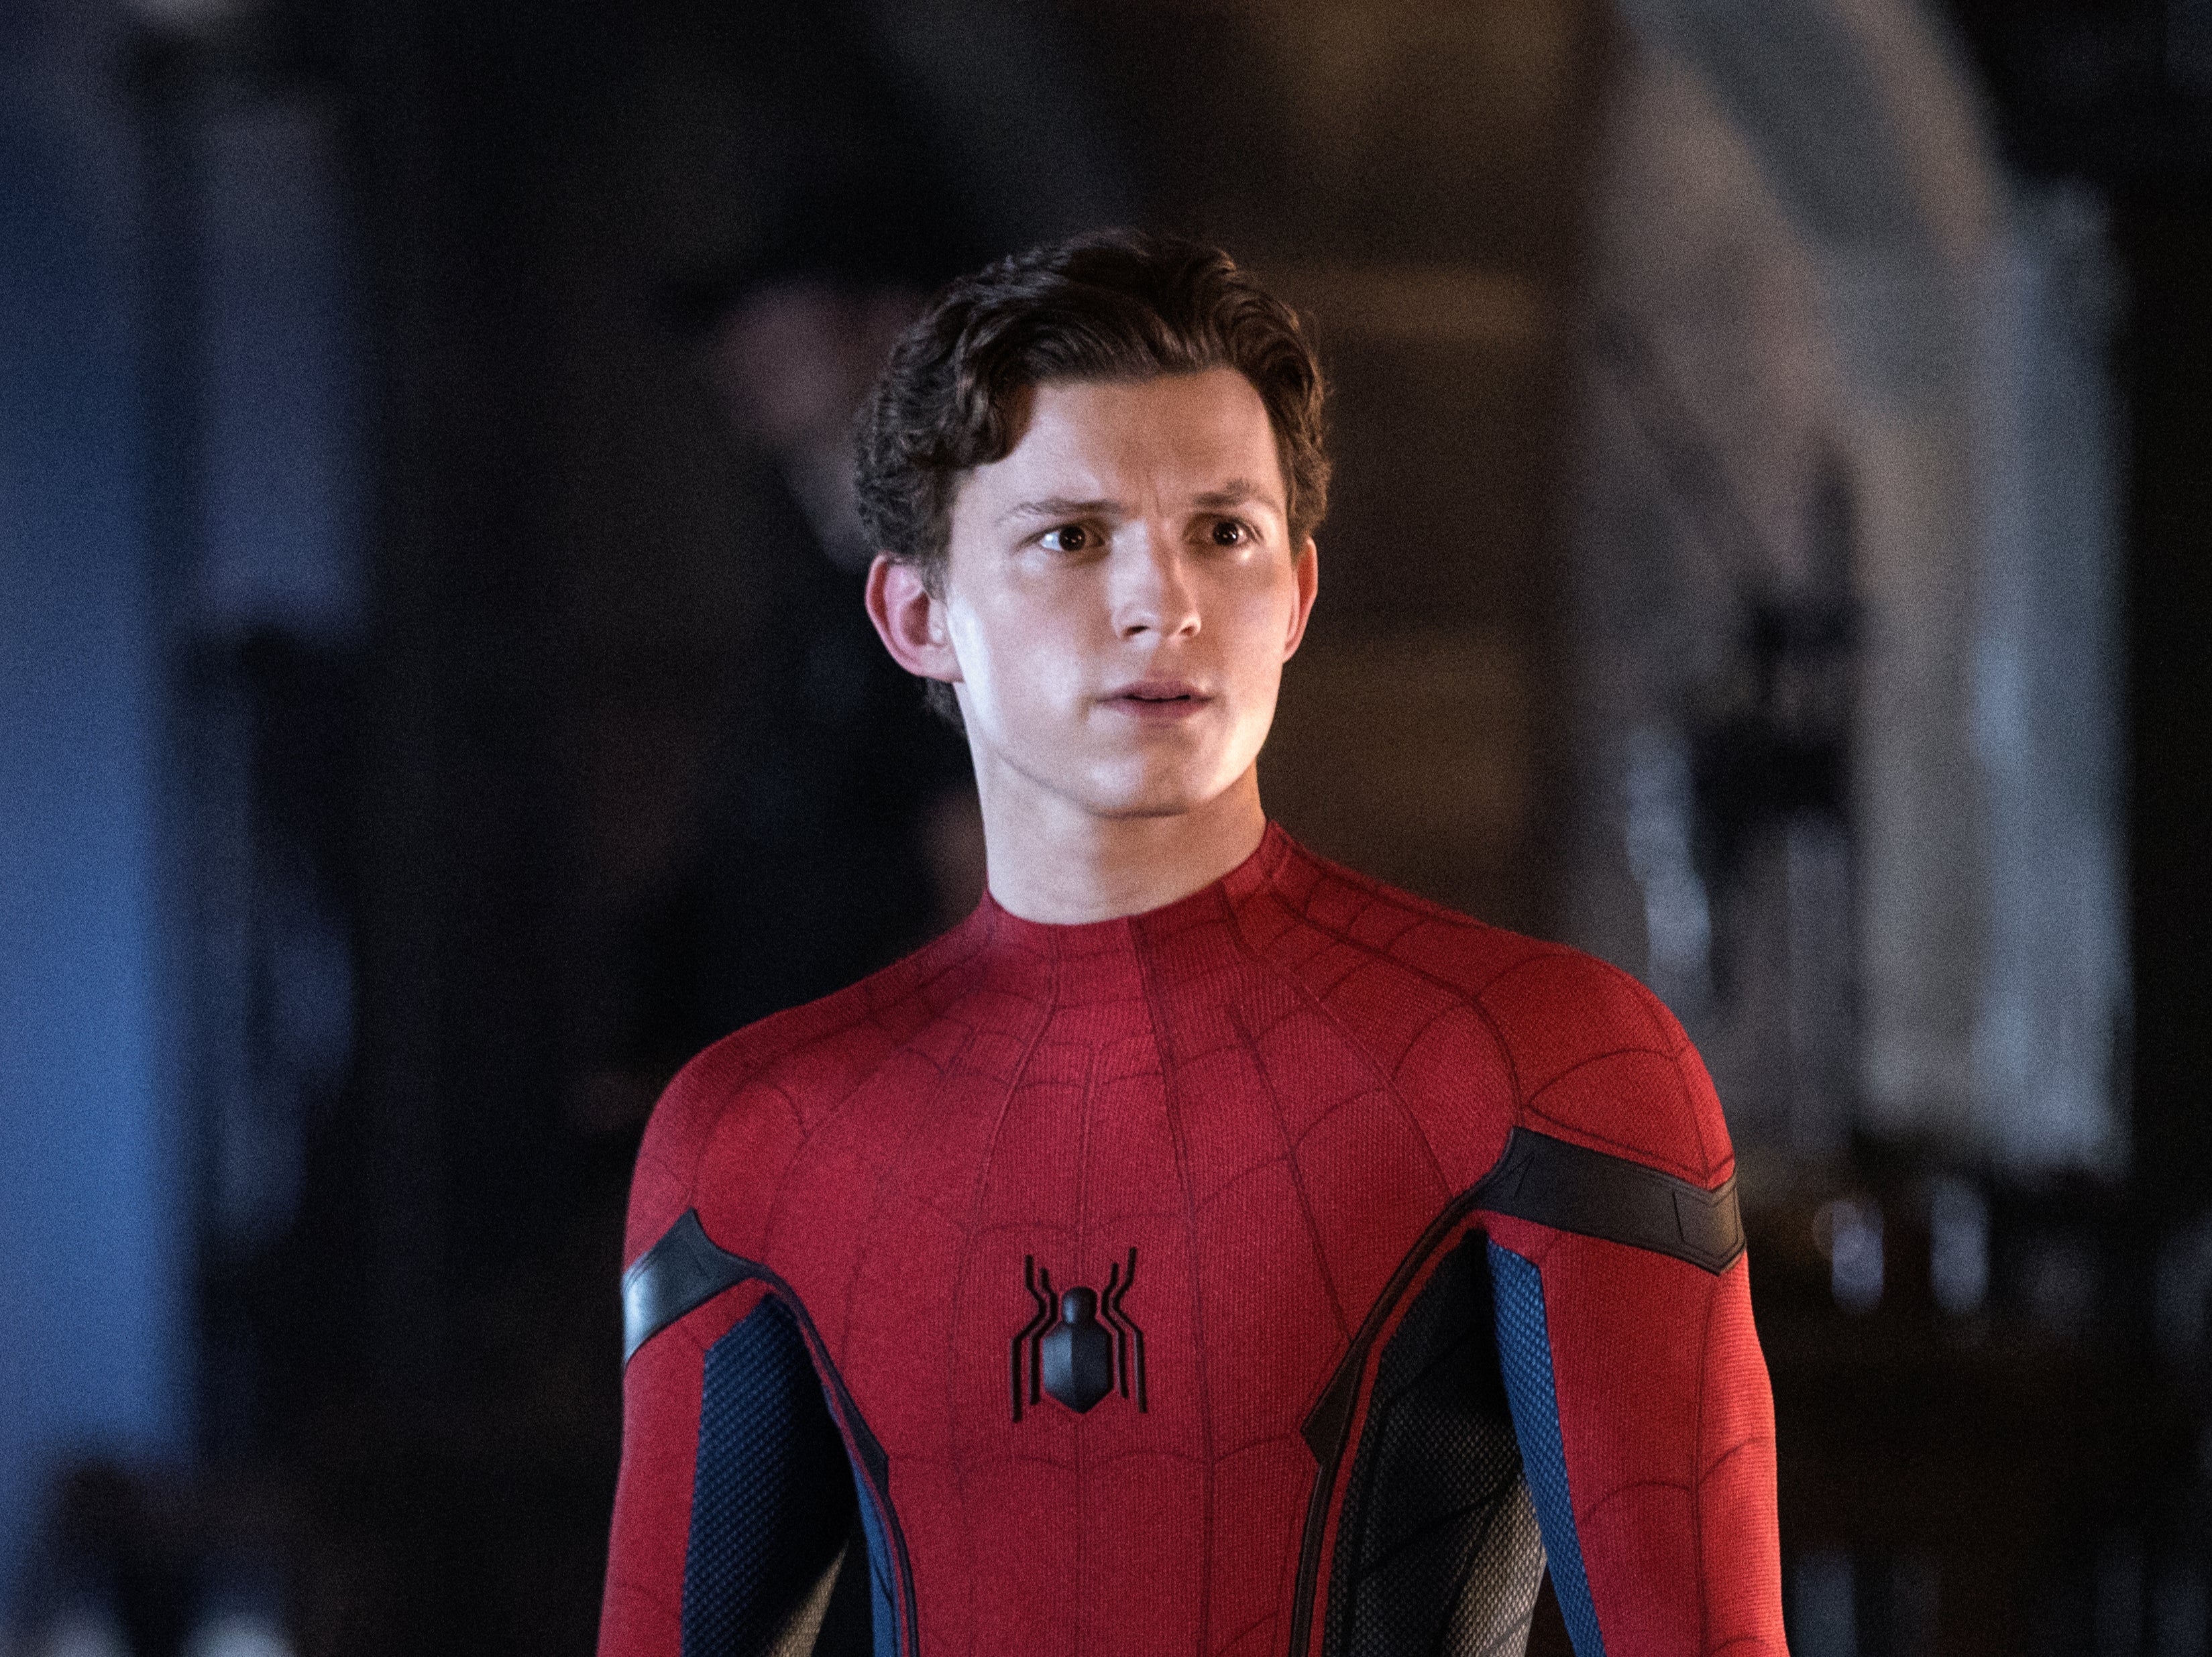 It seems Tom Holland will be joined by Tobey Maguire in new ‘Spider-Man’ film after all